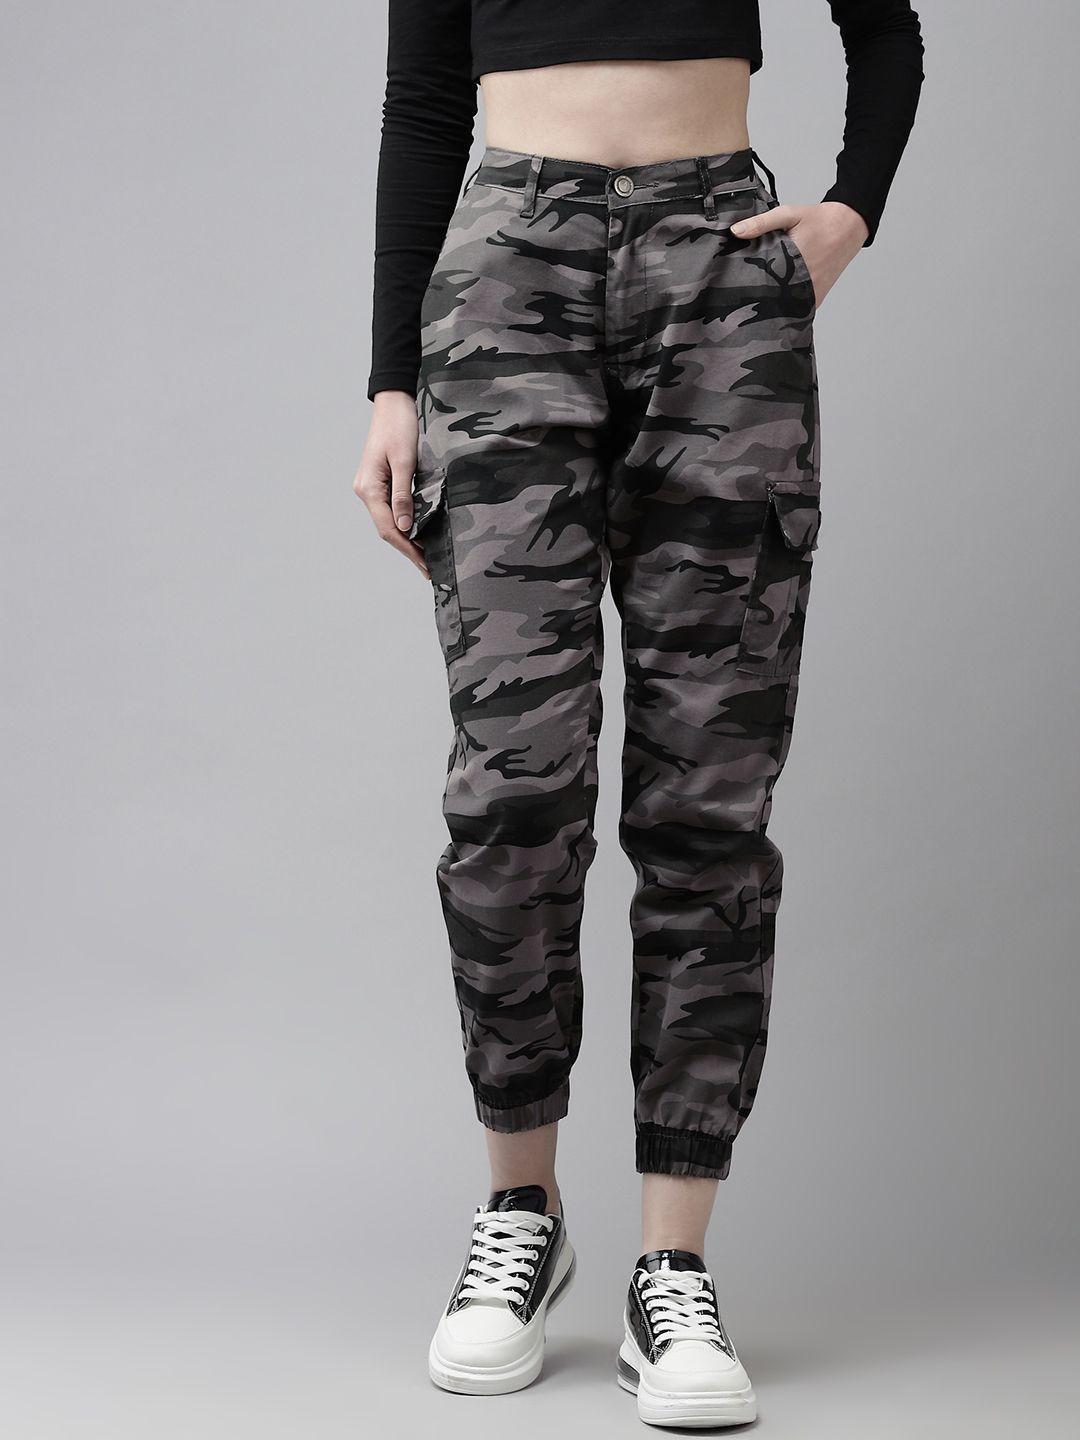 the-dry-state-women-grey-camouflage-printed-high-rise-easy-wash-cropped-joggers-trousers